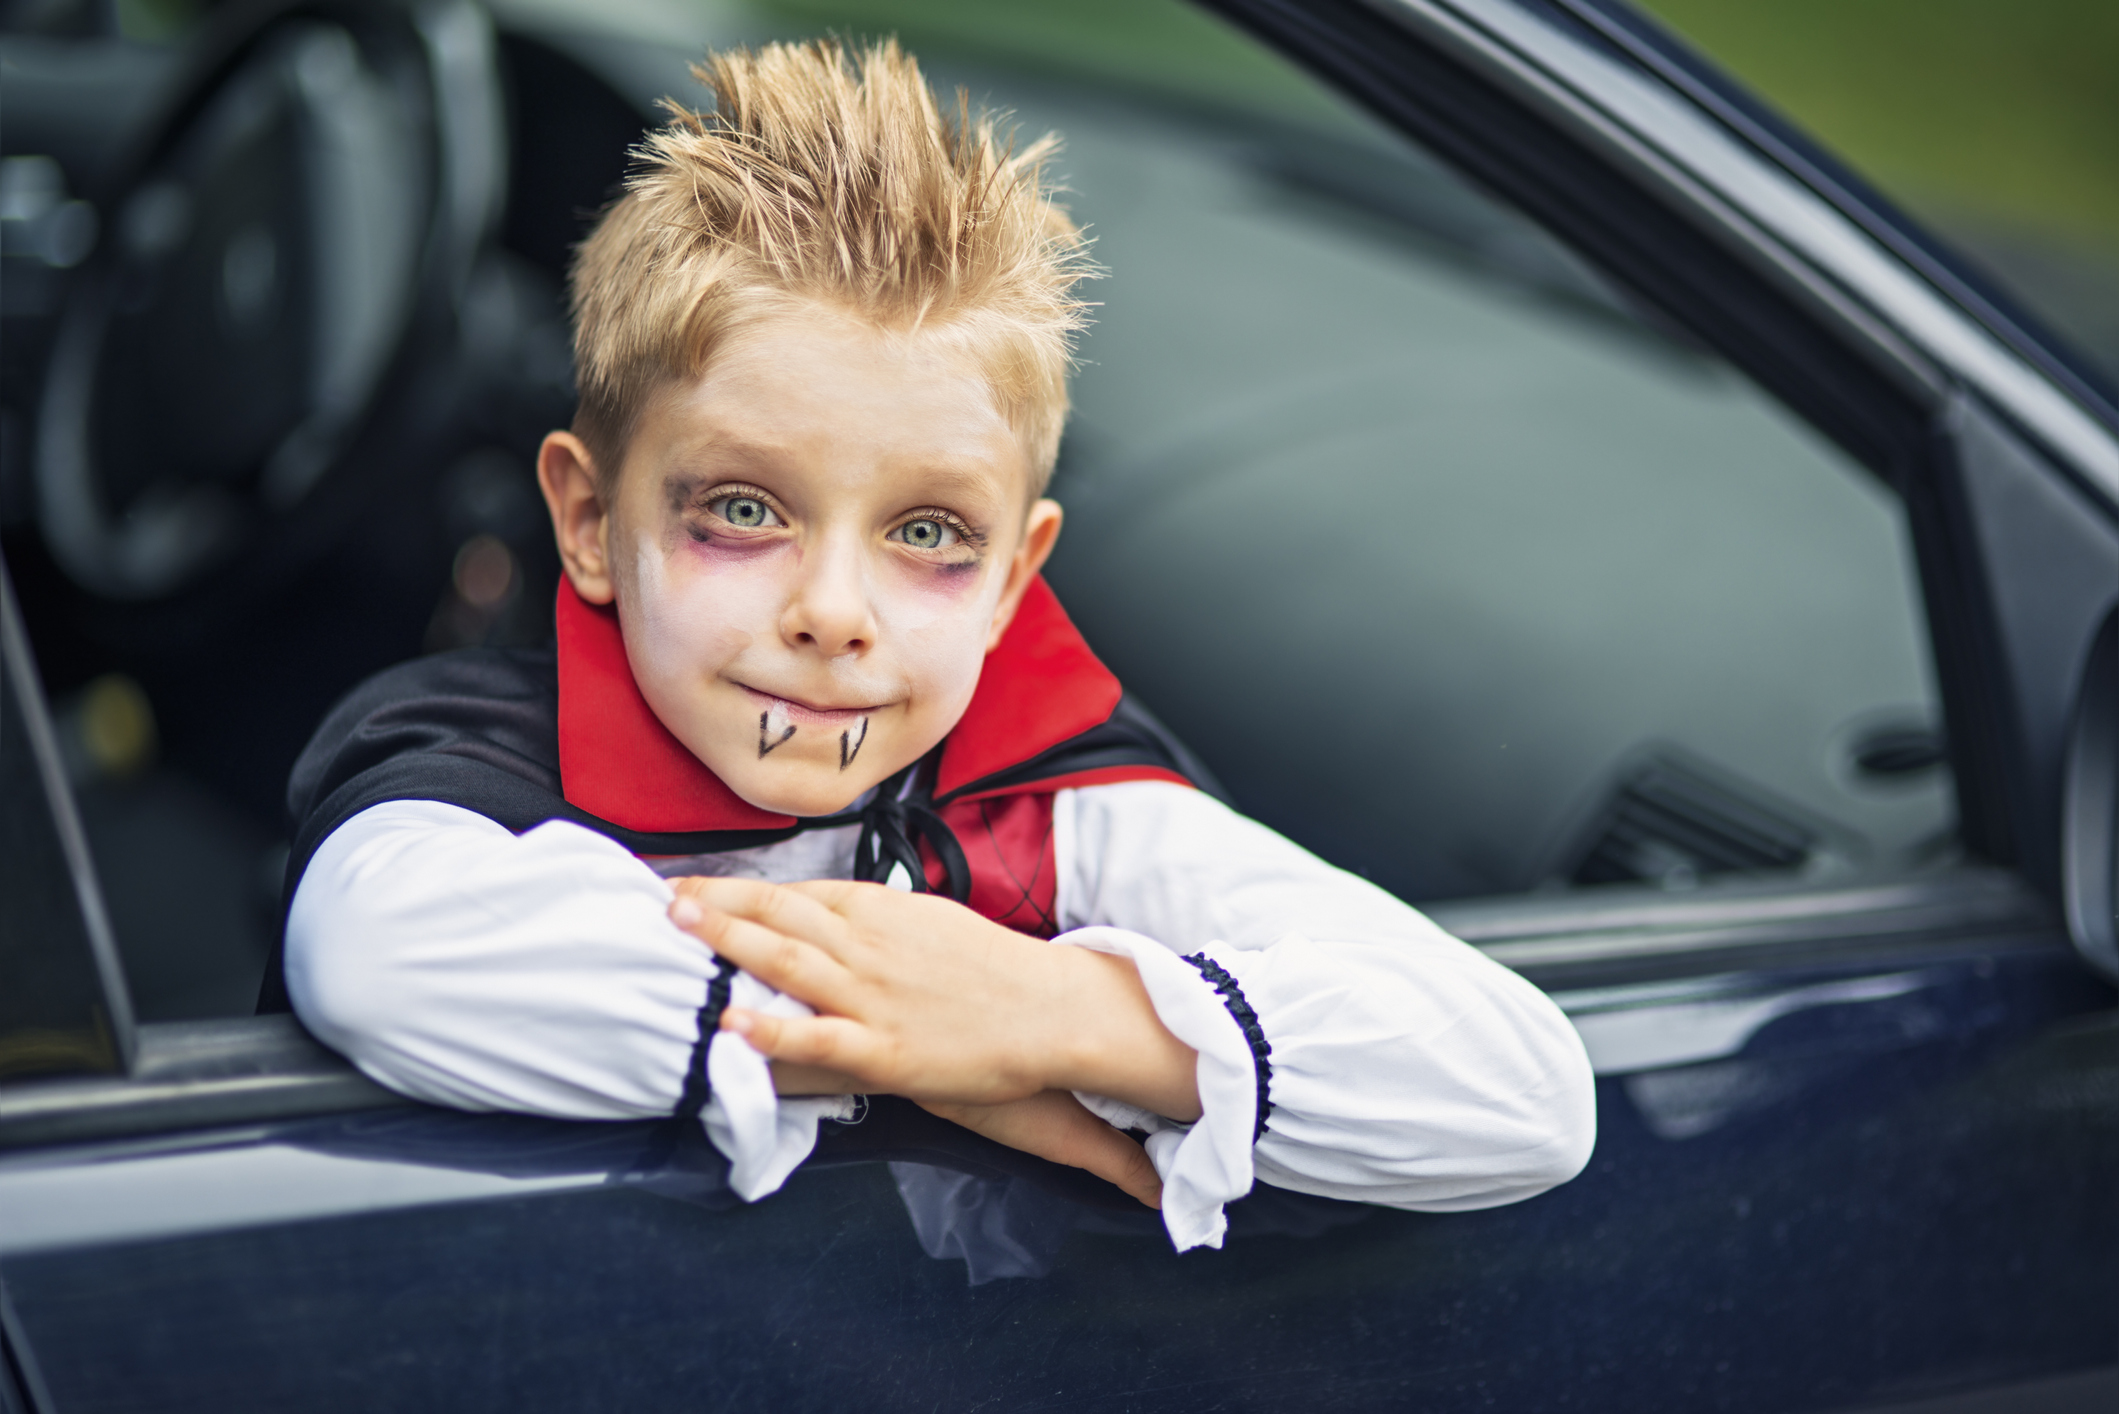 Carle offers tips and tricks for a safe, fang-tastic Halloween